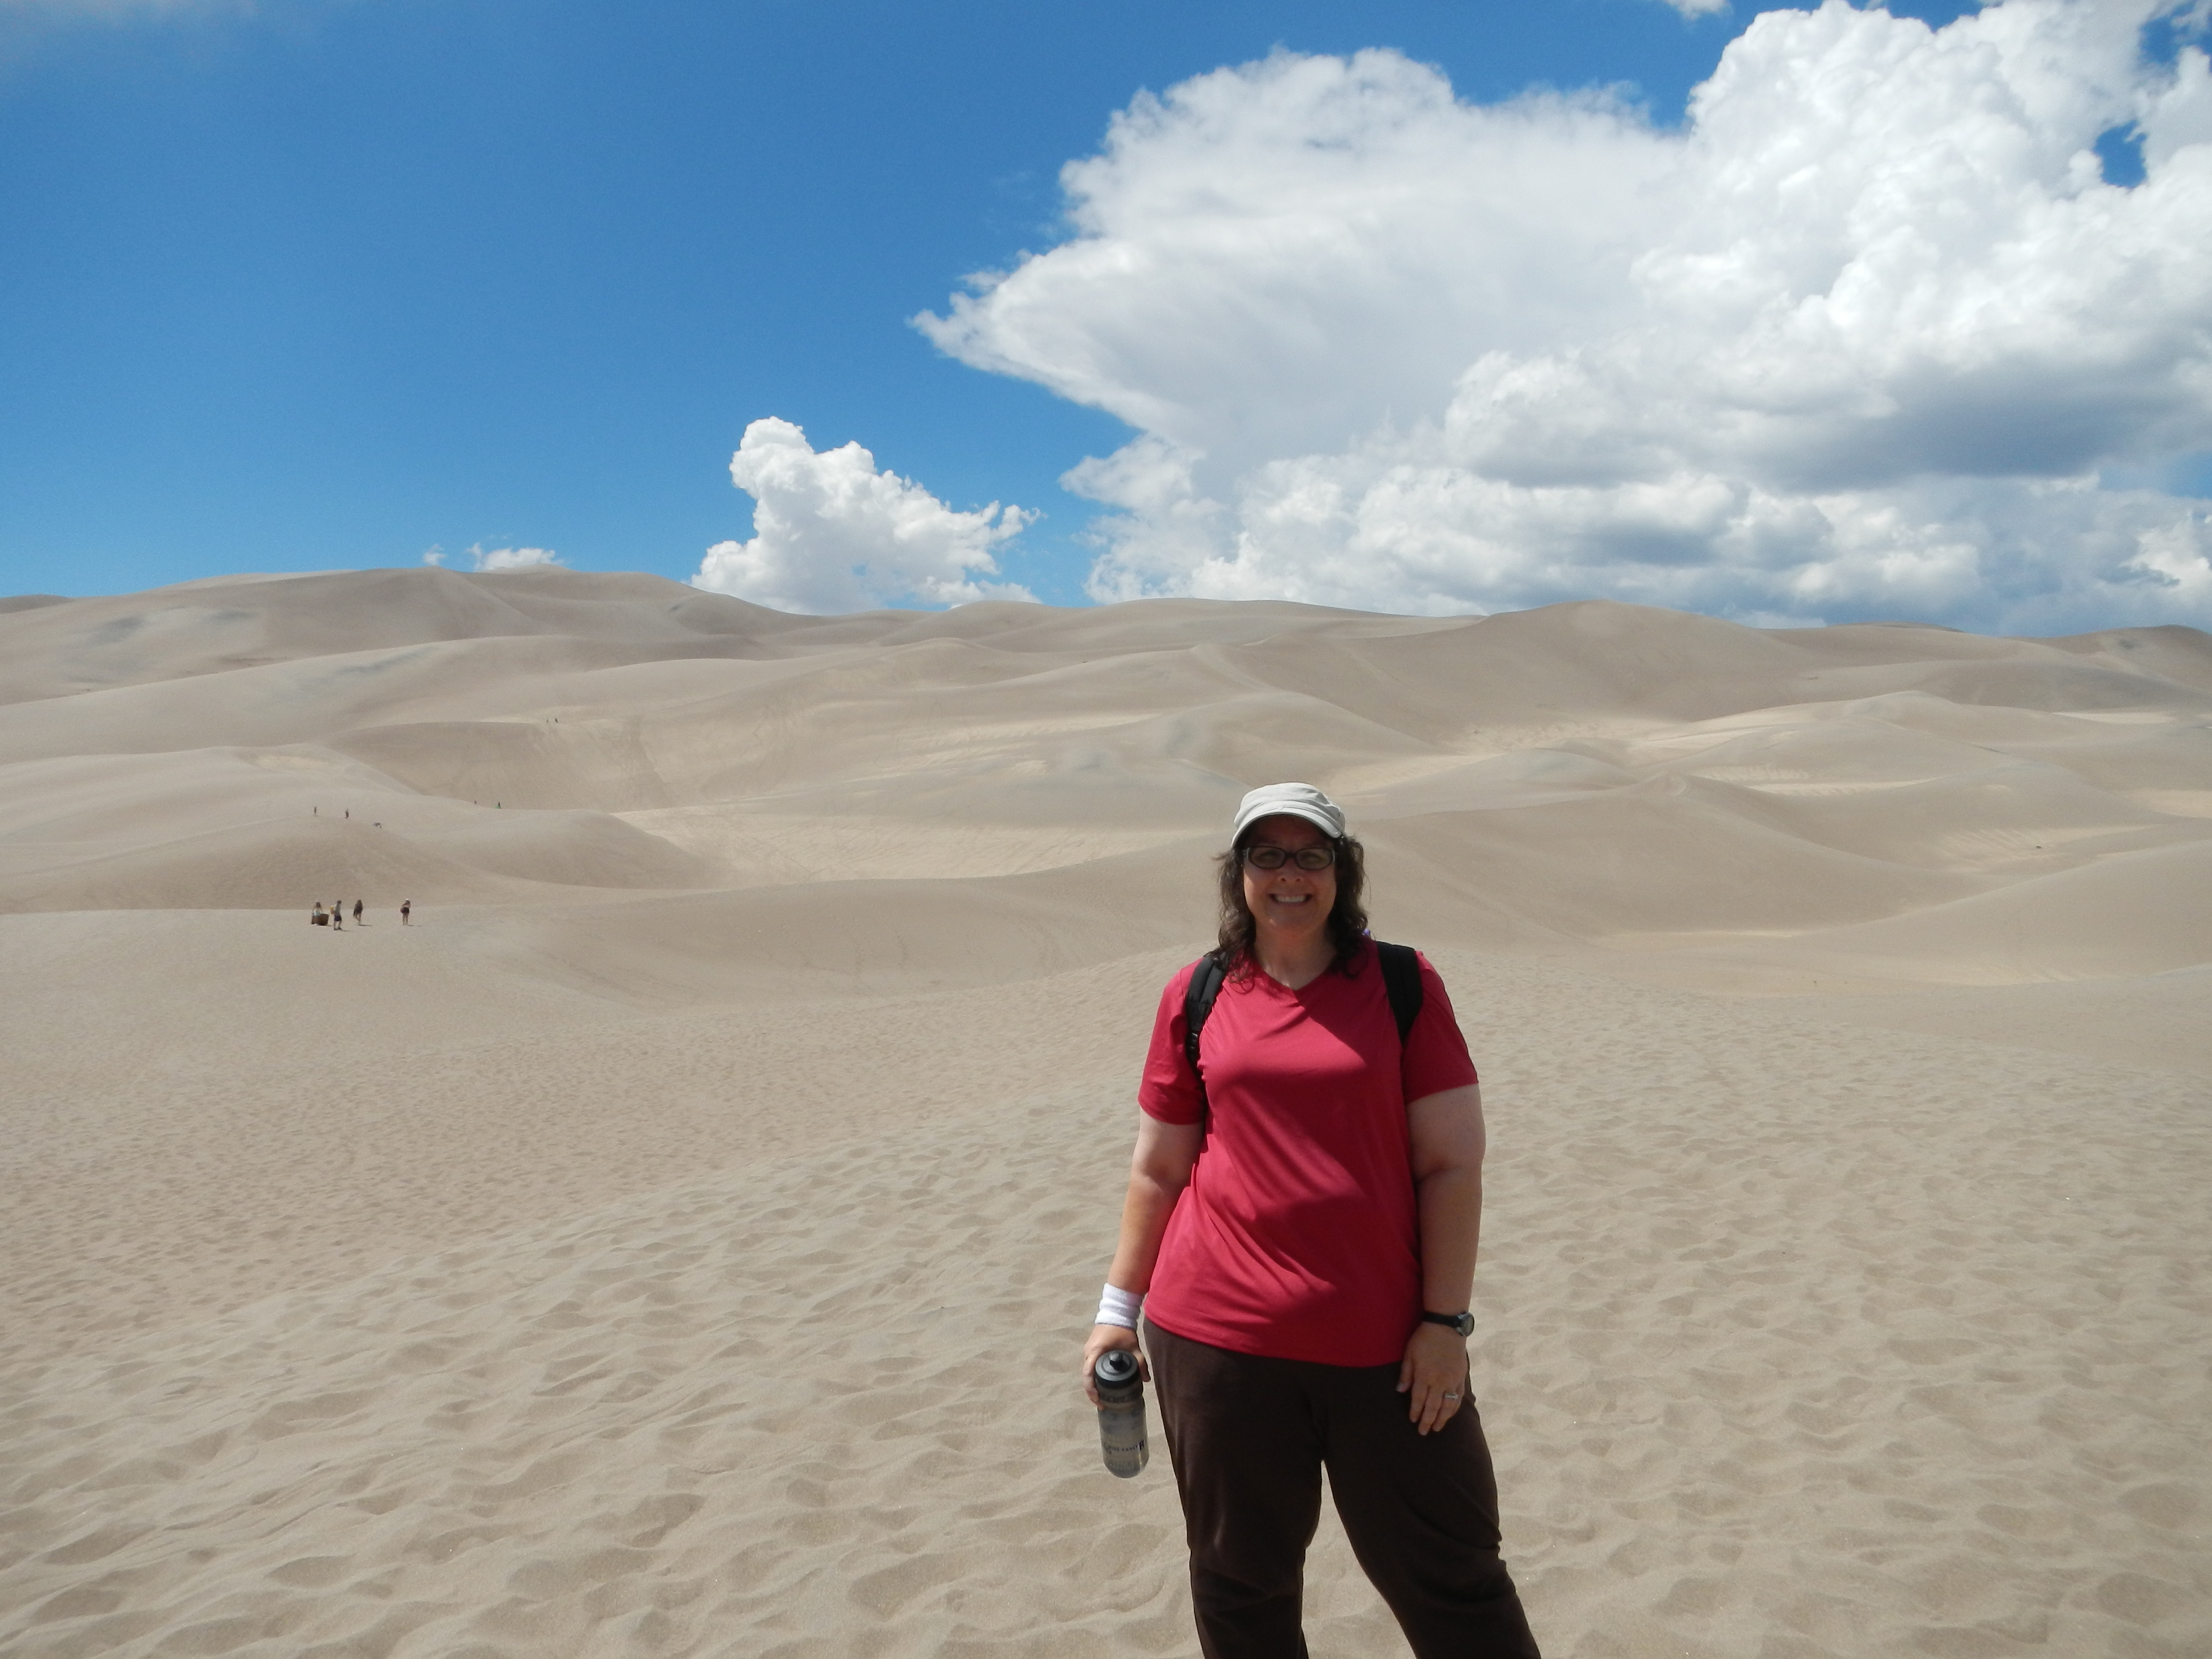 I promise, your message will not get lost among the Great Sand Dunes in this spectacular national park in Colorado - I'll reply as soon as I can!